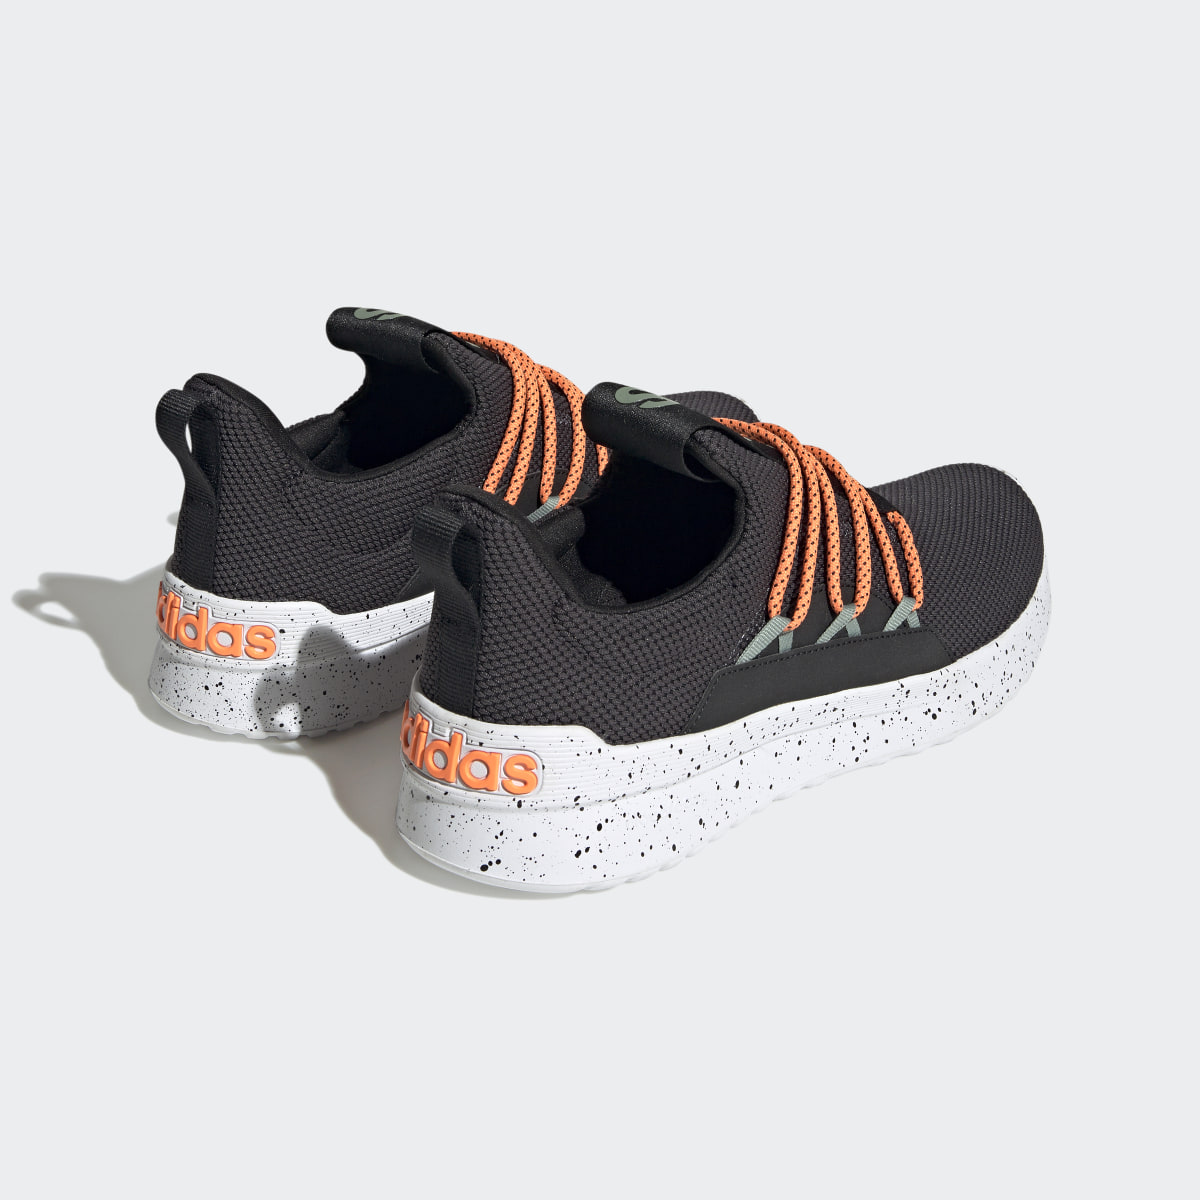 Adidas Lite Racer Adapt 5.0 Shoes. 6